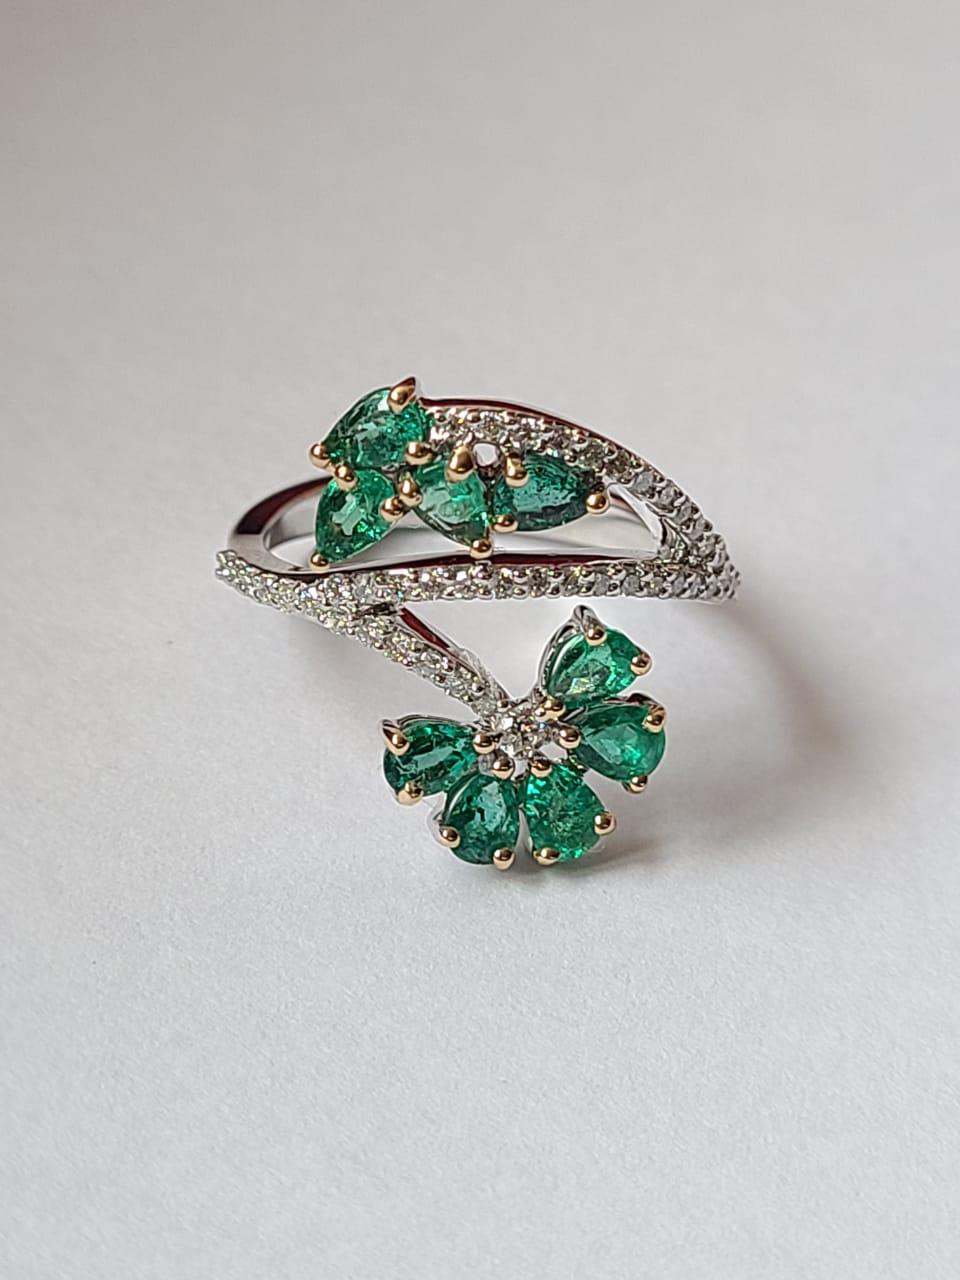 A very beautiful Emerald Cocktail Ring set in 18K Gold & Diamonds. The weight of the pear shaped Emeralds is 1.13 carats. The Emeralds are of Zambian origin, and are completely natural, without any treatment. The weight of the Diamonds is 0.32